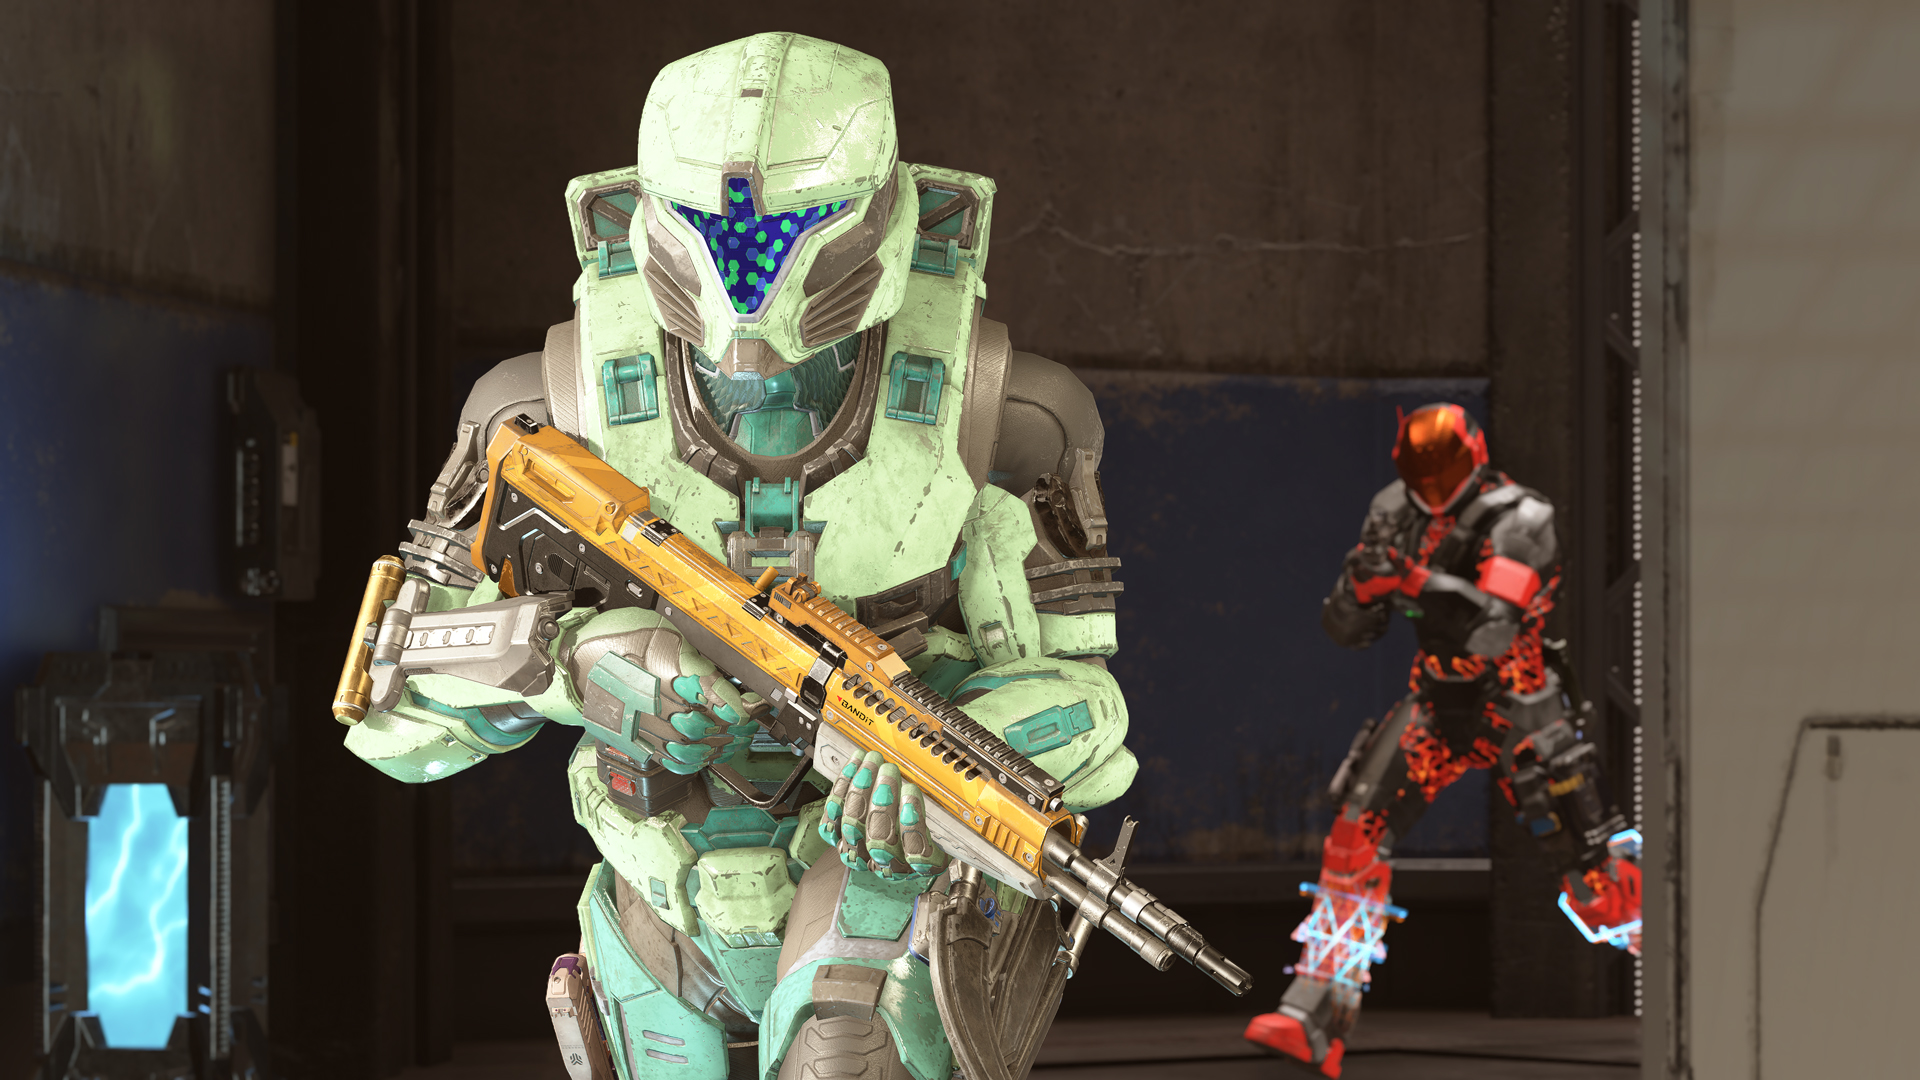 A green Spartan runs down a hallway while another Spartan wearing black and red armor follows closely behind.